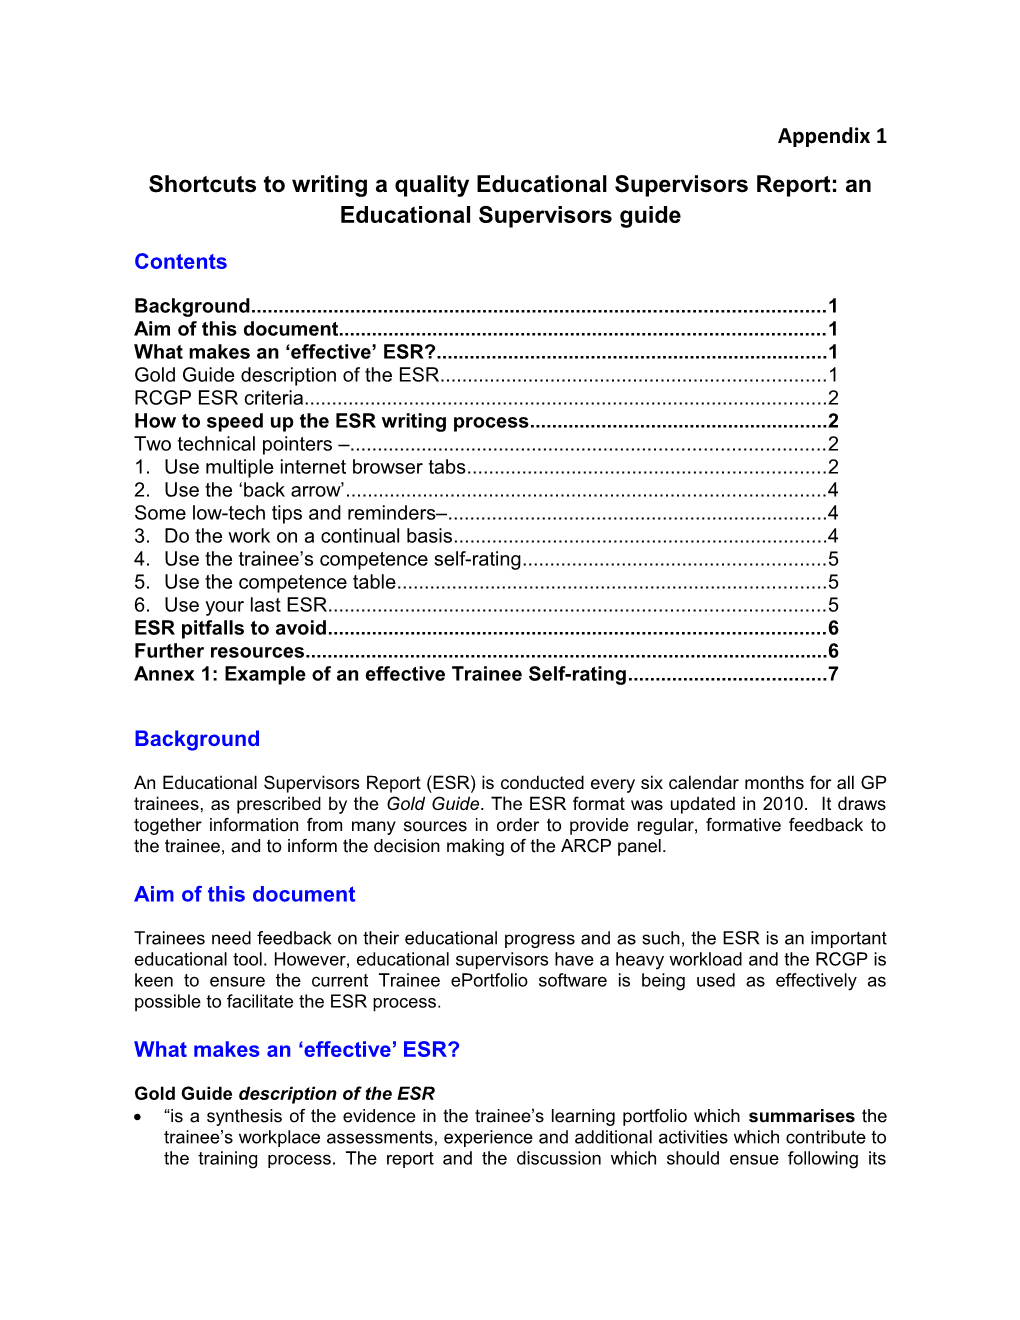 Shortcuts to Writing a Quality Educational Supervisors Report: an Educational Supervisors